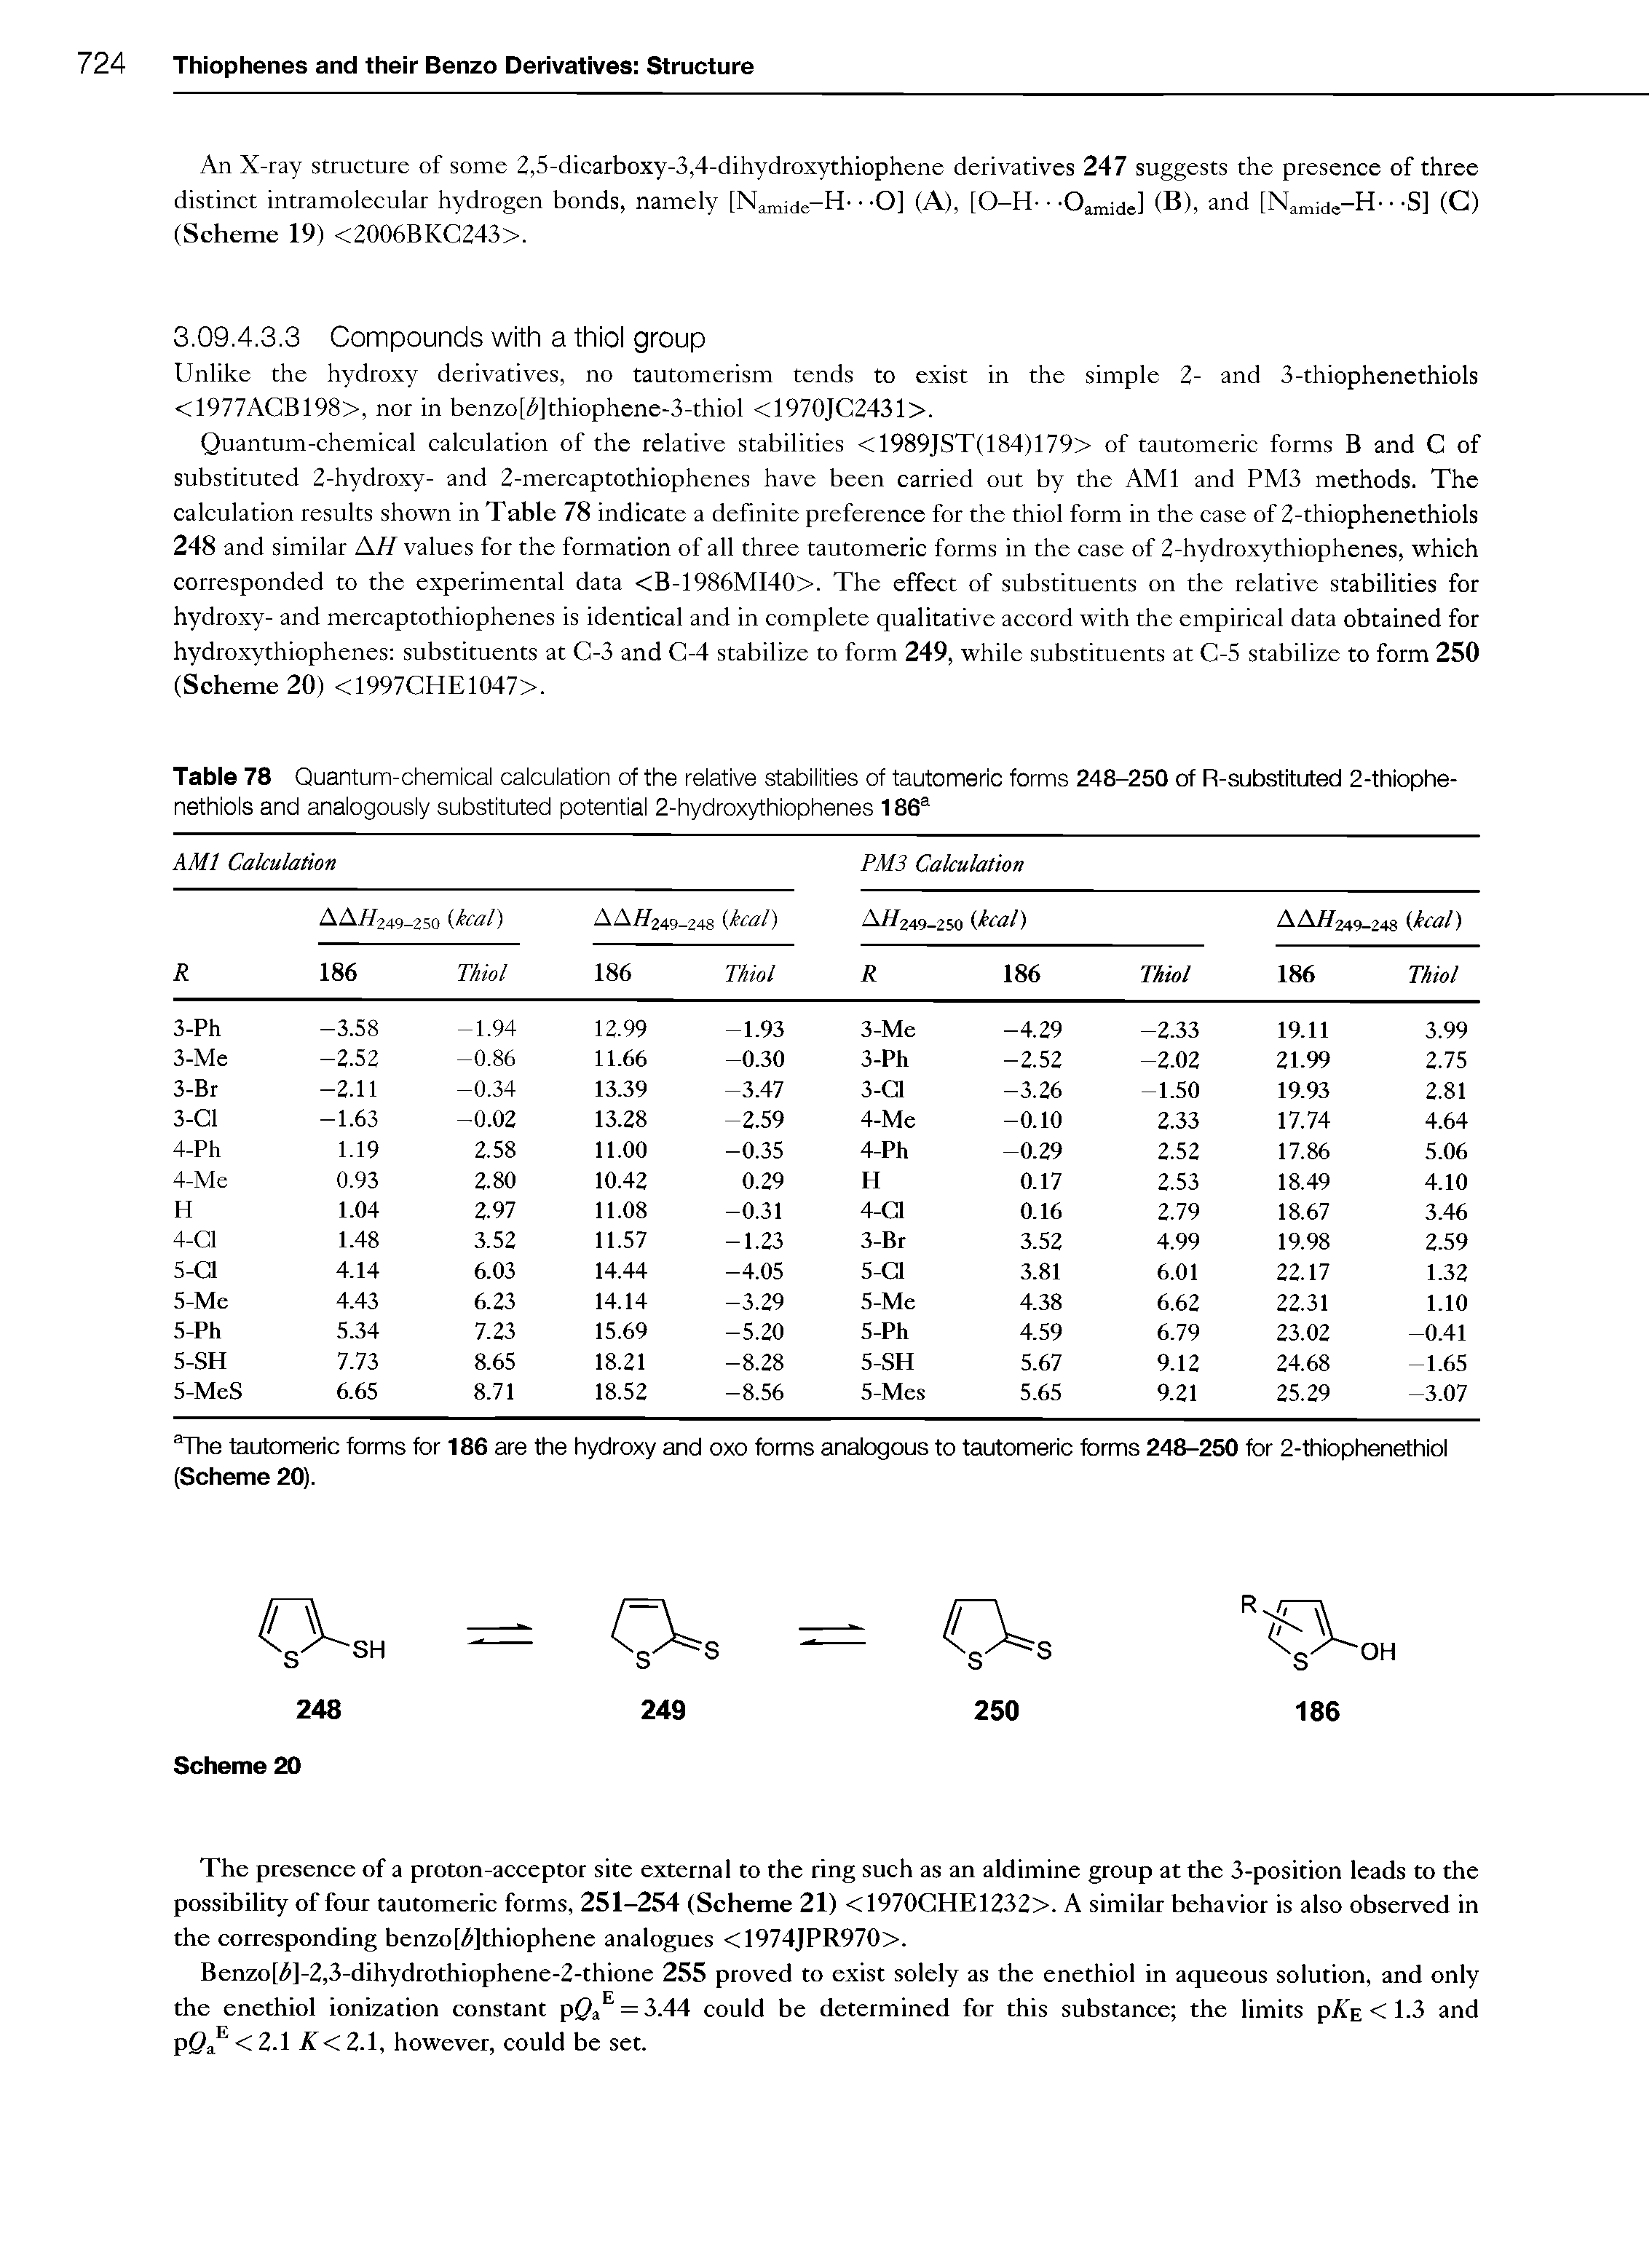 Table 78 Quantum-chemical calculation of the relative stabilities of tautomeric forms 248-250 of R-substituted 2-thiophe-nethiols and analogously substituted potential 2-hydroxythiophenes 186 ...